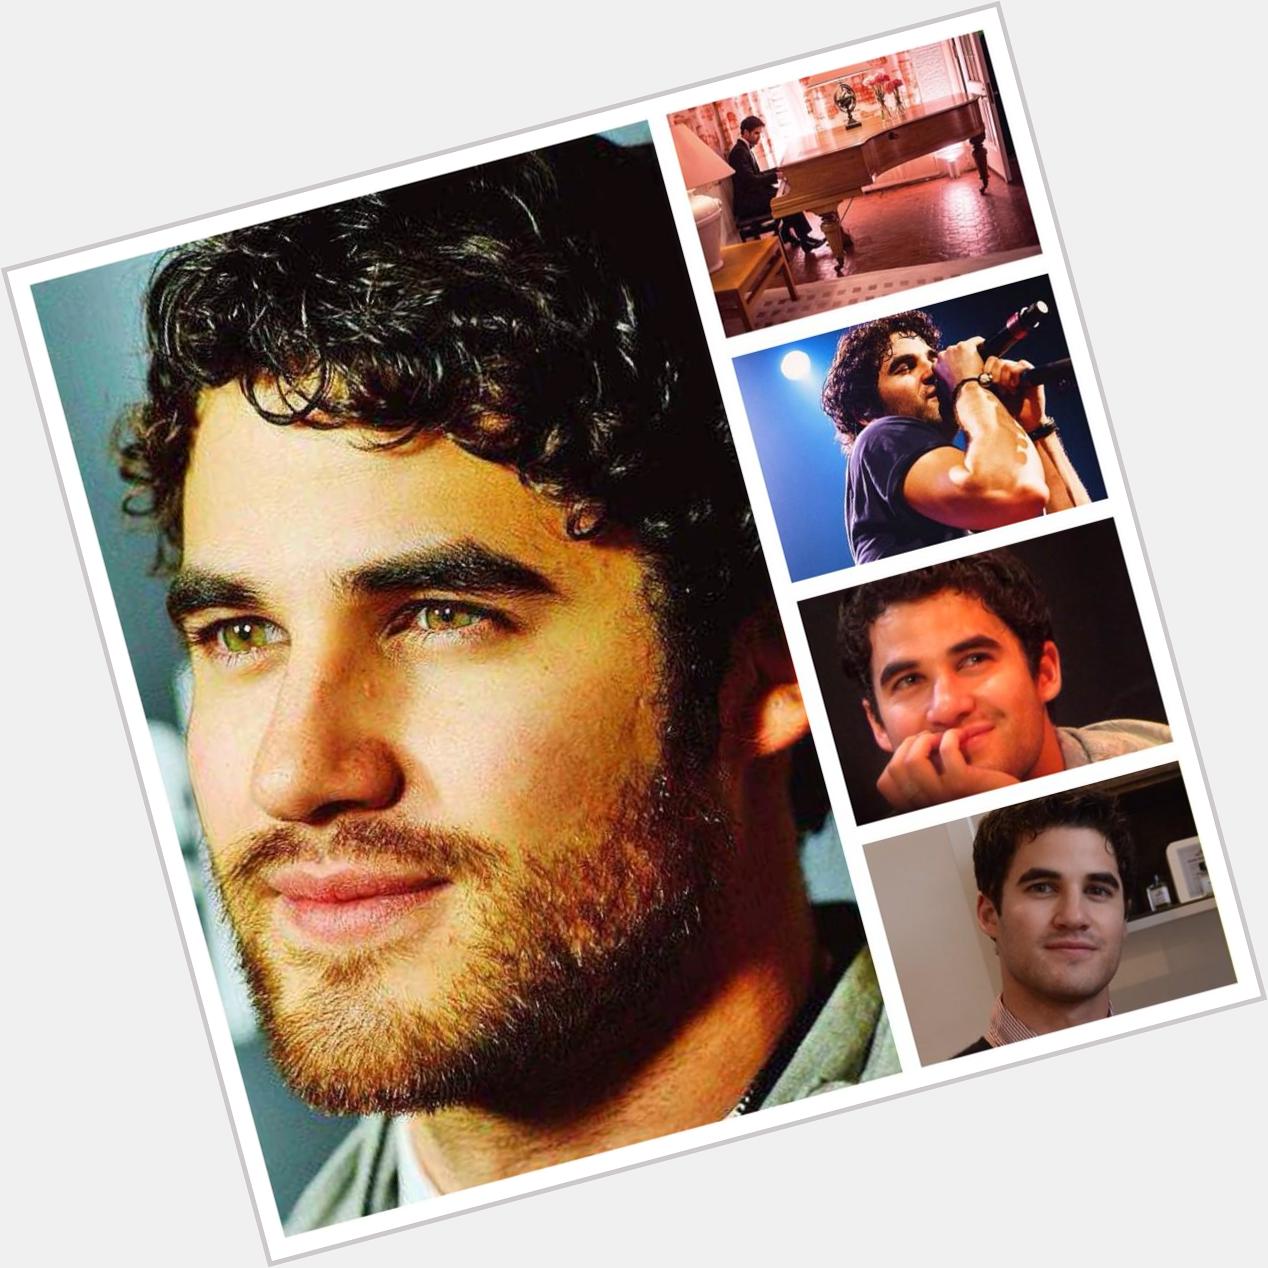  Happy 28th Birthday Darren - from the Facebook fan page... Darren Criss is Not Alone!  